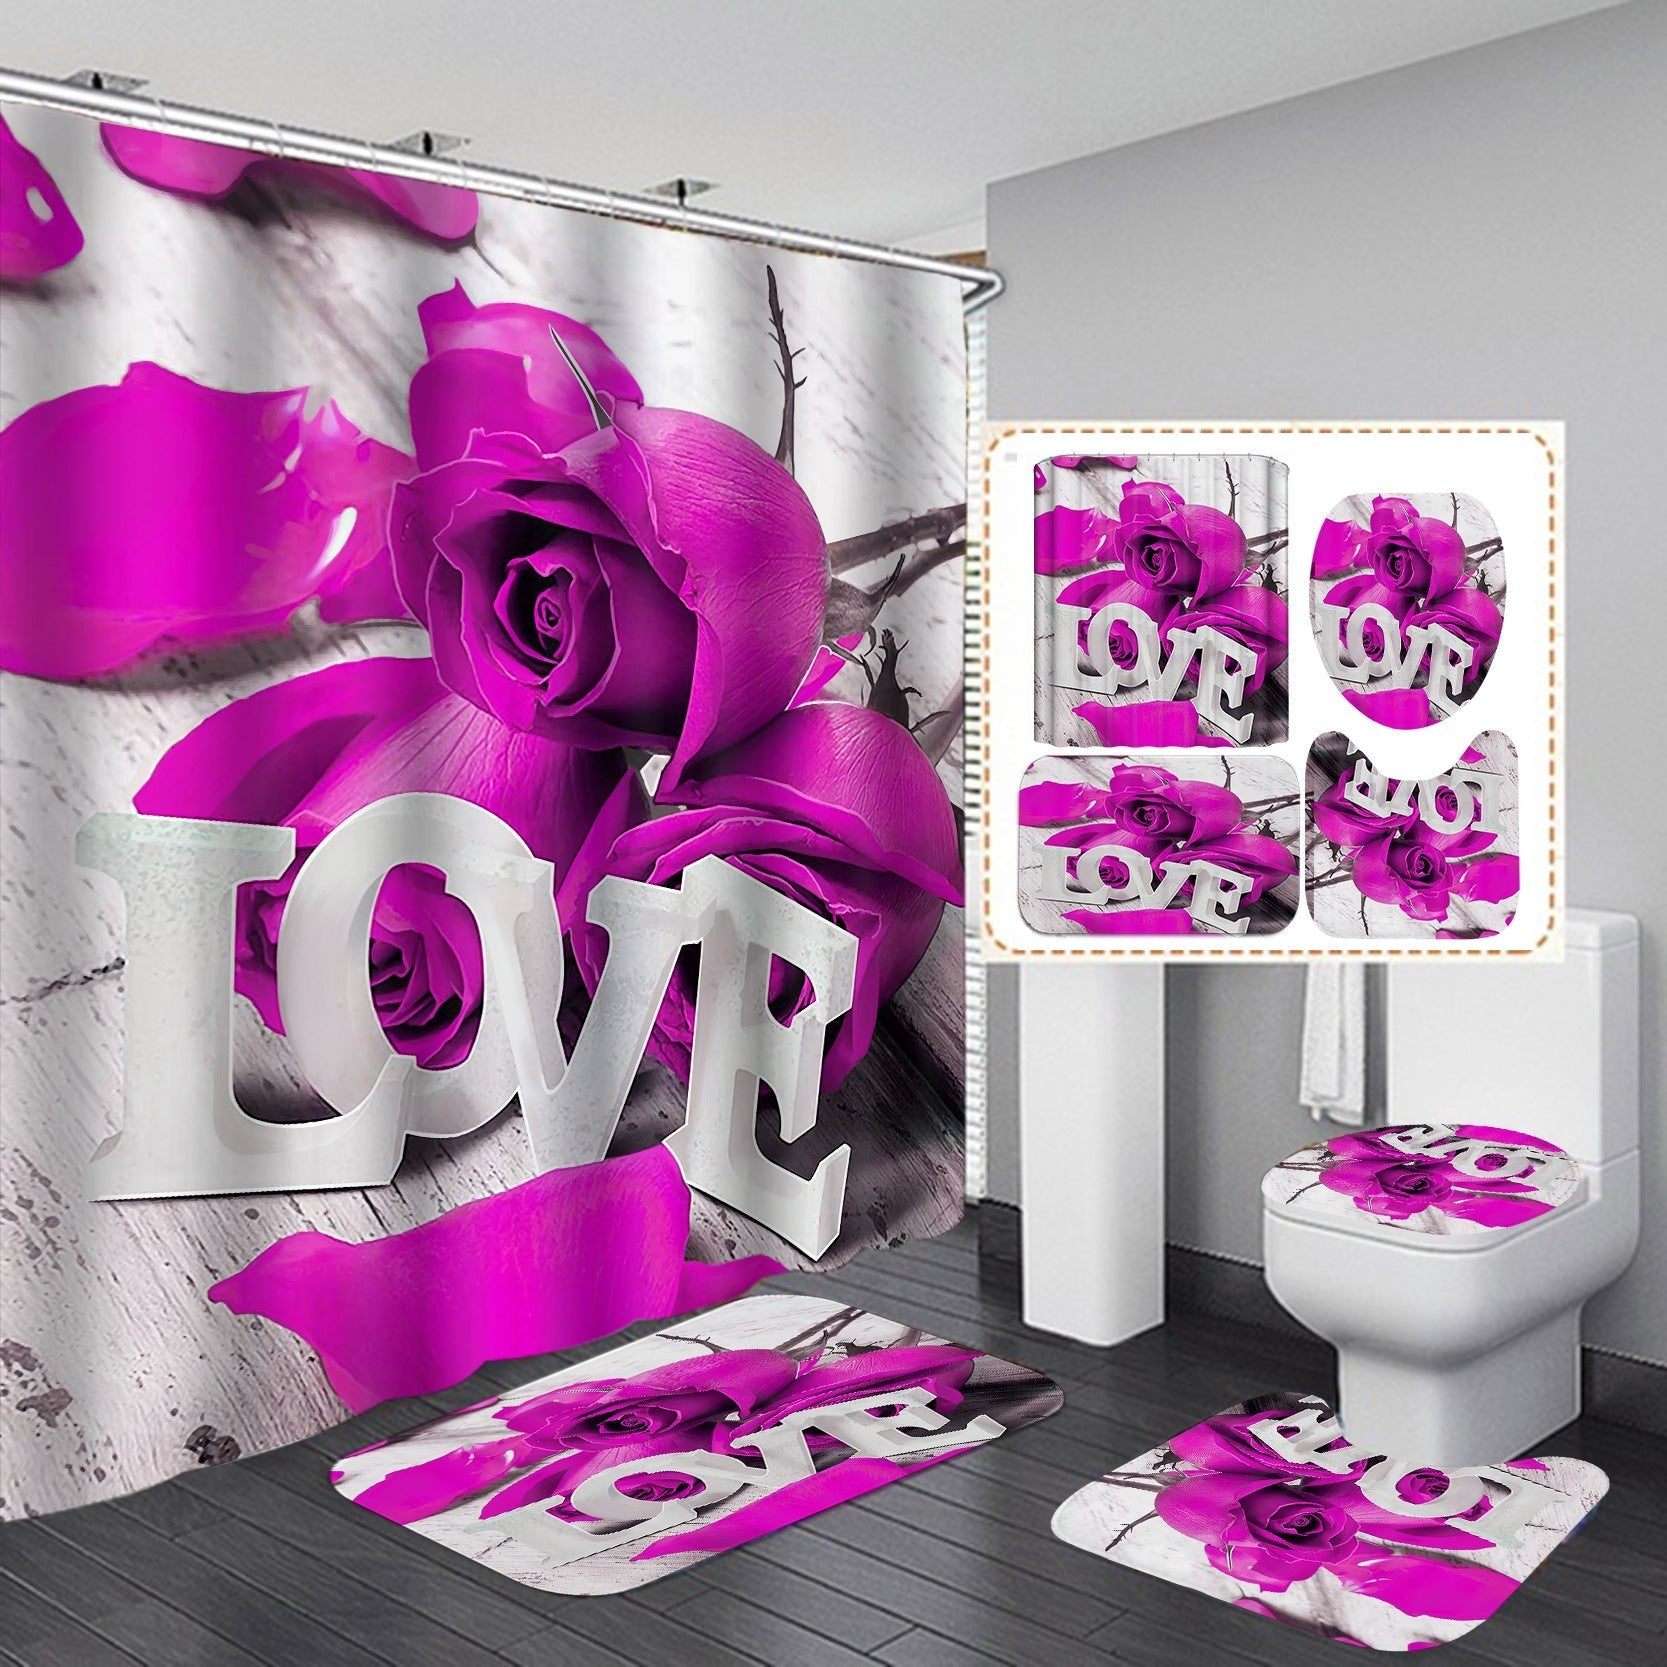 "Love" 3D Rose Design Shower Curtain Bathroom SetsNon-Slip Toilet Lid Cover-Shower Curtain-180×180cm Shower Curtain Only-3-Free Shipping Leatheretro